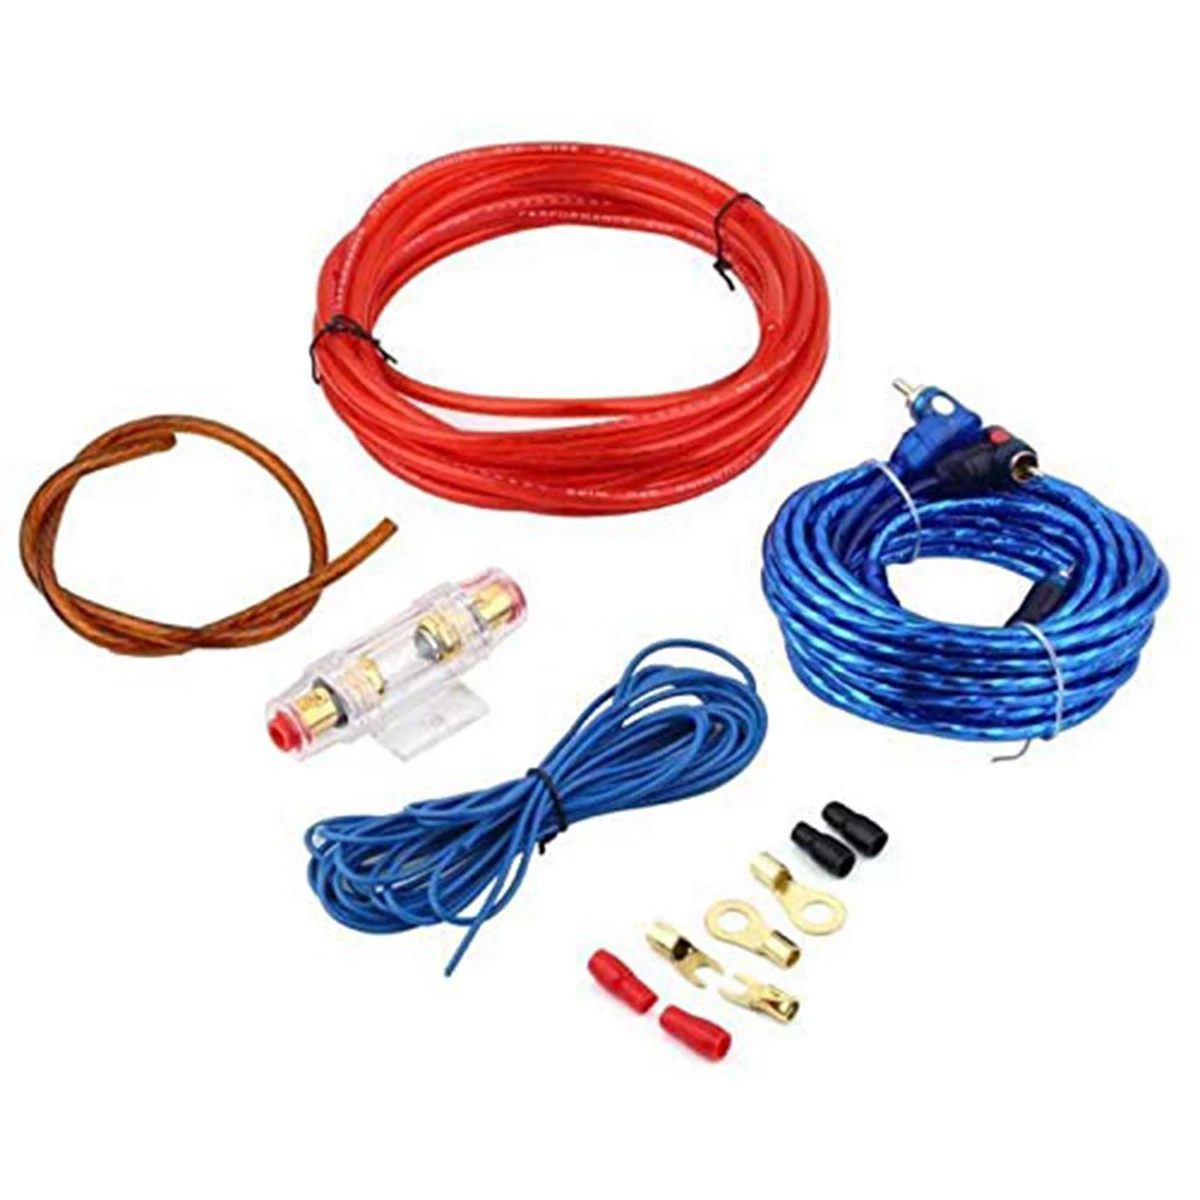 

60 AMP Fuse Holder 8GA Power Cable Subwoofer Speaker Car Audio Wire Wiring Amplifier RCA Power Cable Fuse